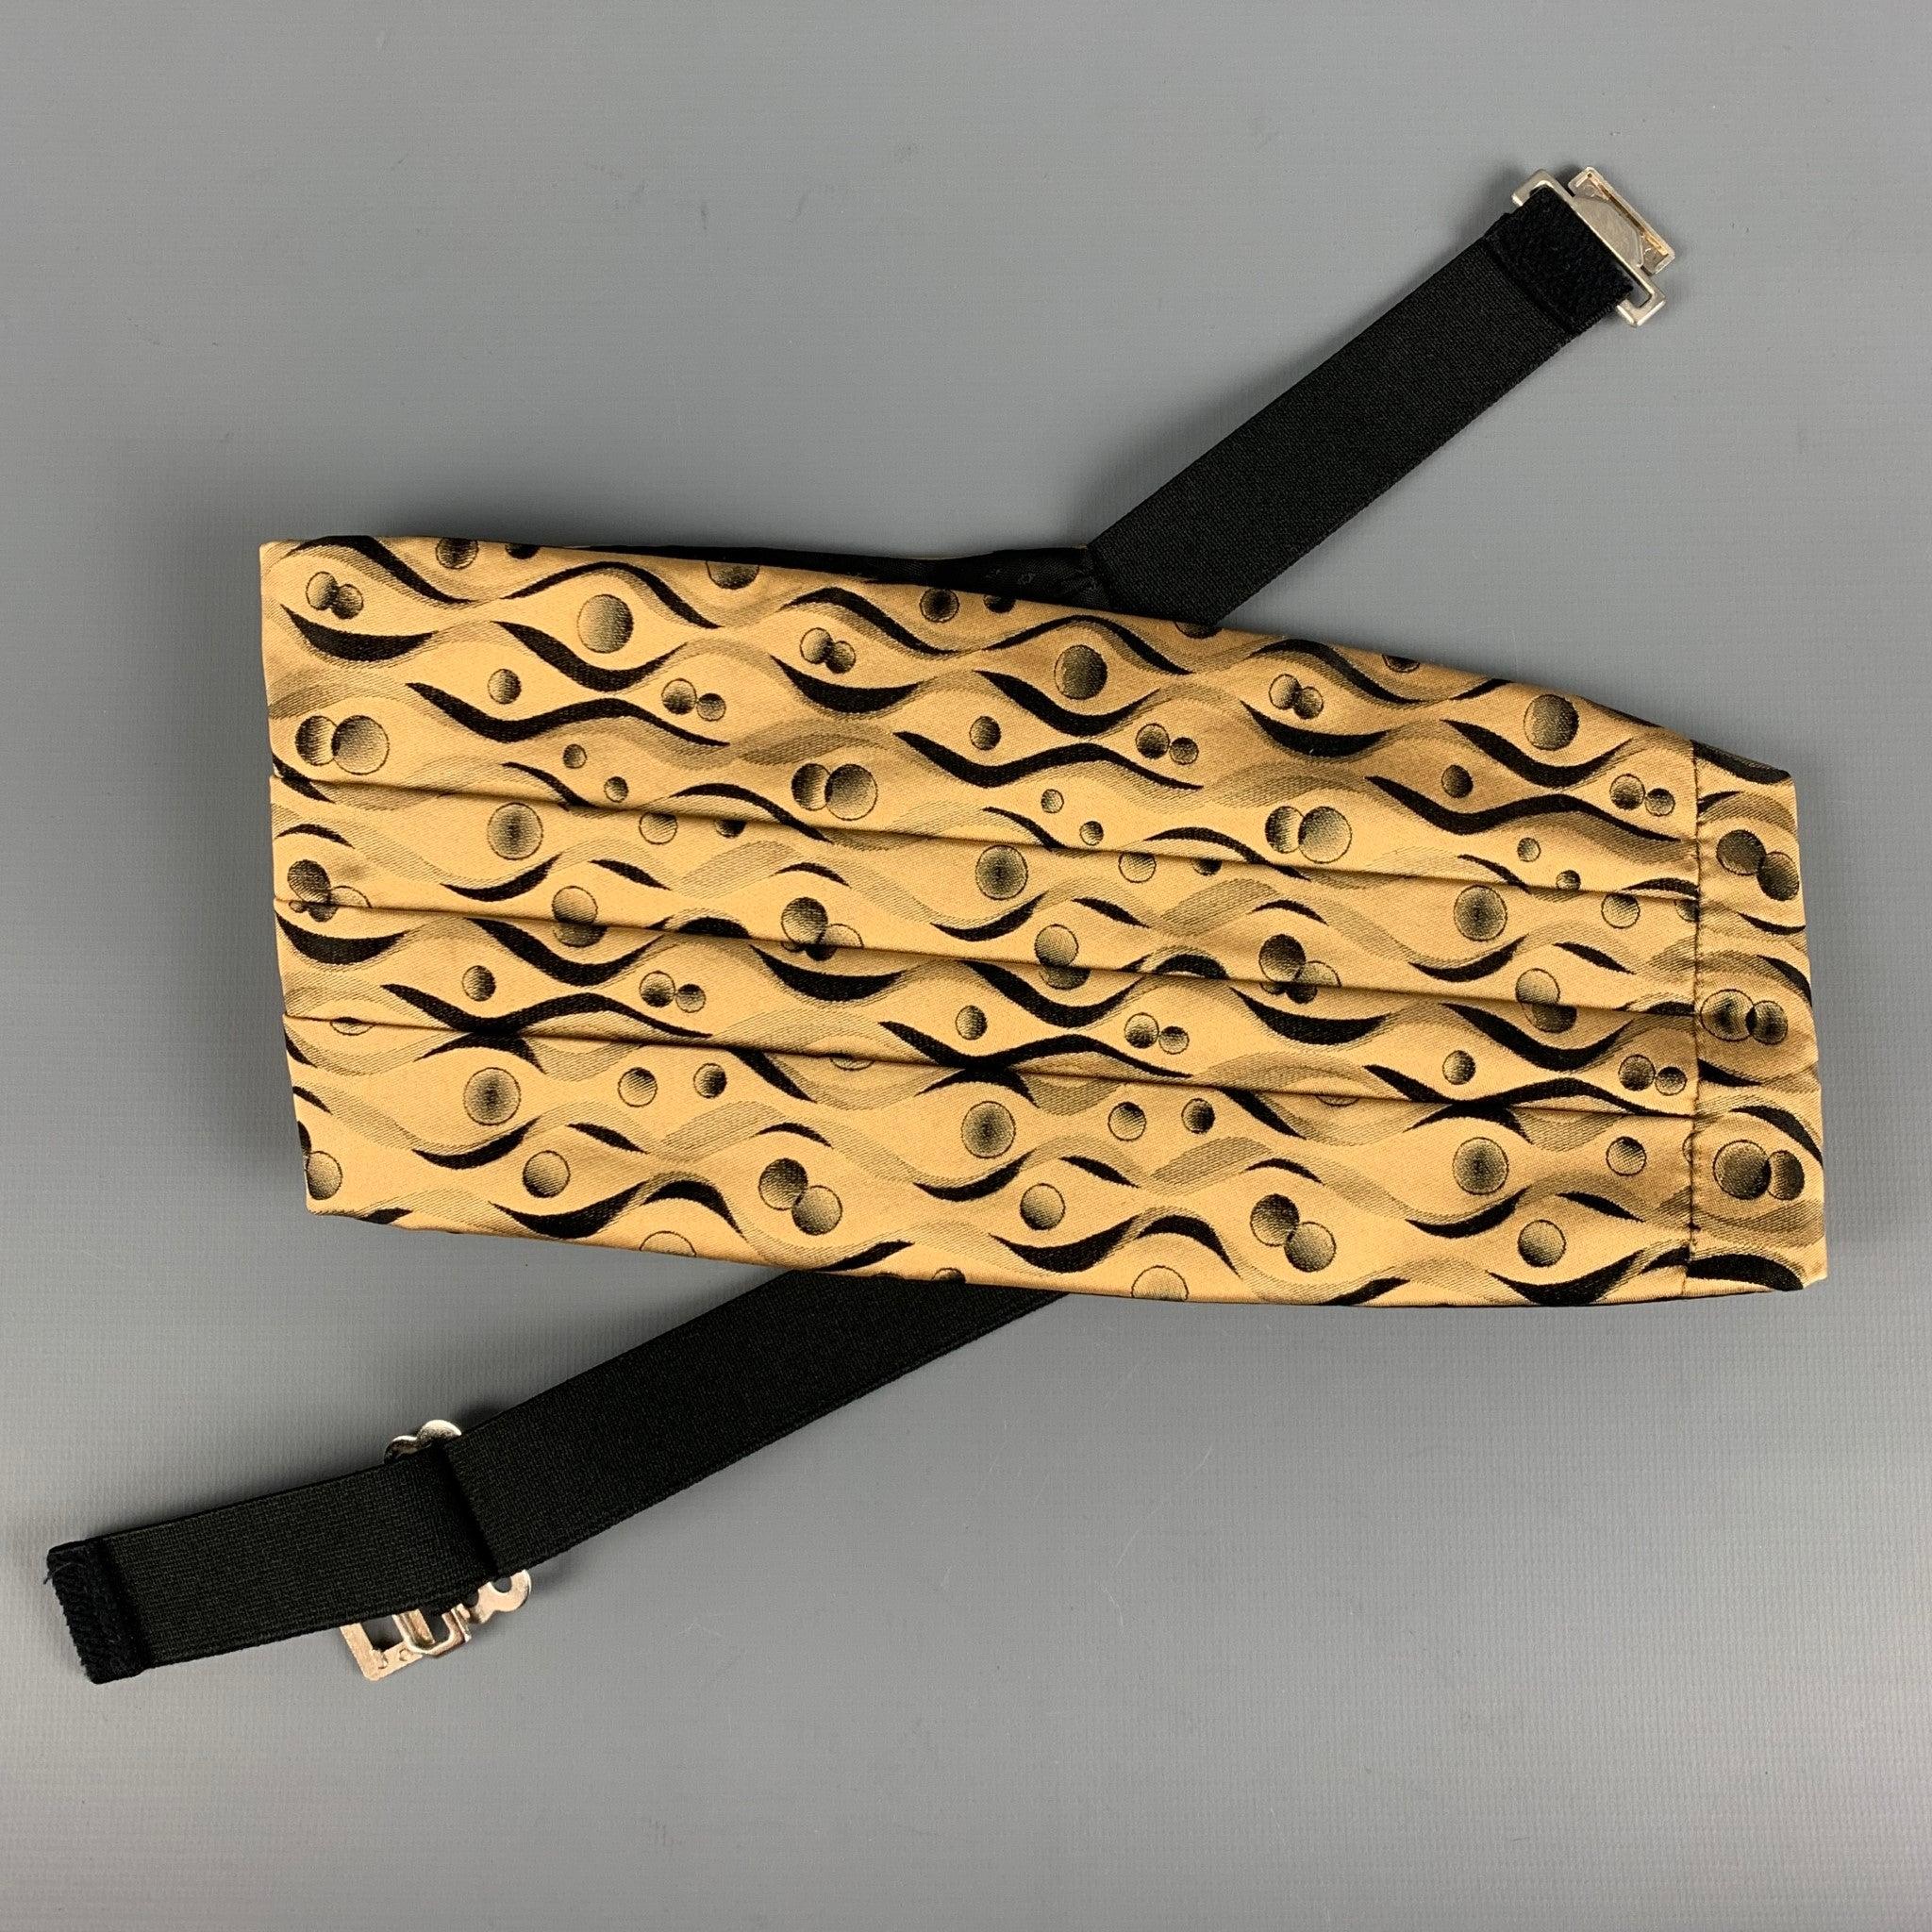 NEIMAN MARCUS
cummerbund in a yellow and black silk featuring an abstract jacquard pattern, and matching pre-tied bow tie. Comes with box.Very Good Pre-Owned Condition. Minor signs of wear. 

Measurements: 
  - Cummerbund:Width: 5 inches Length: 35